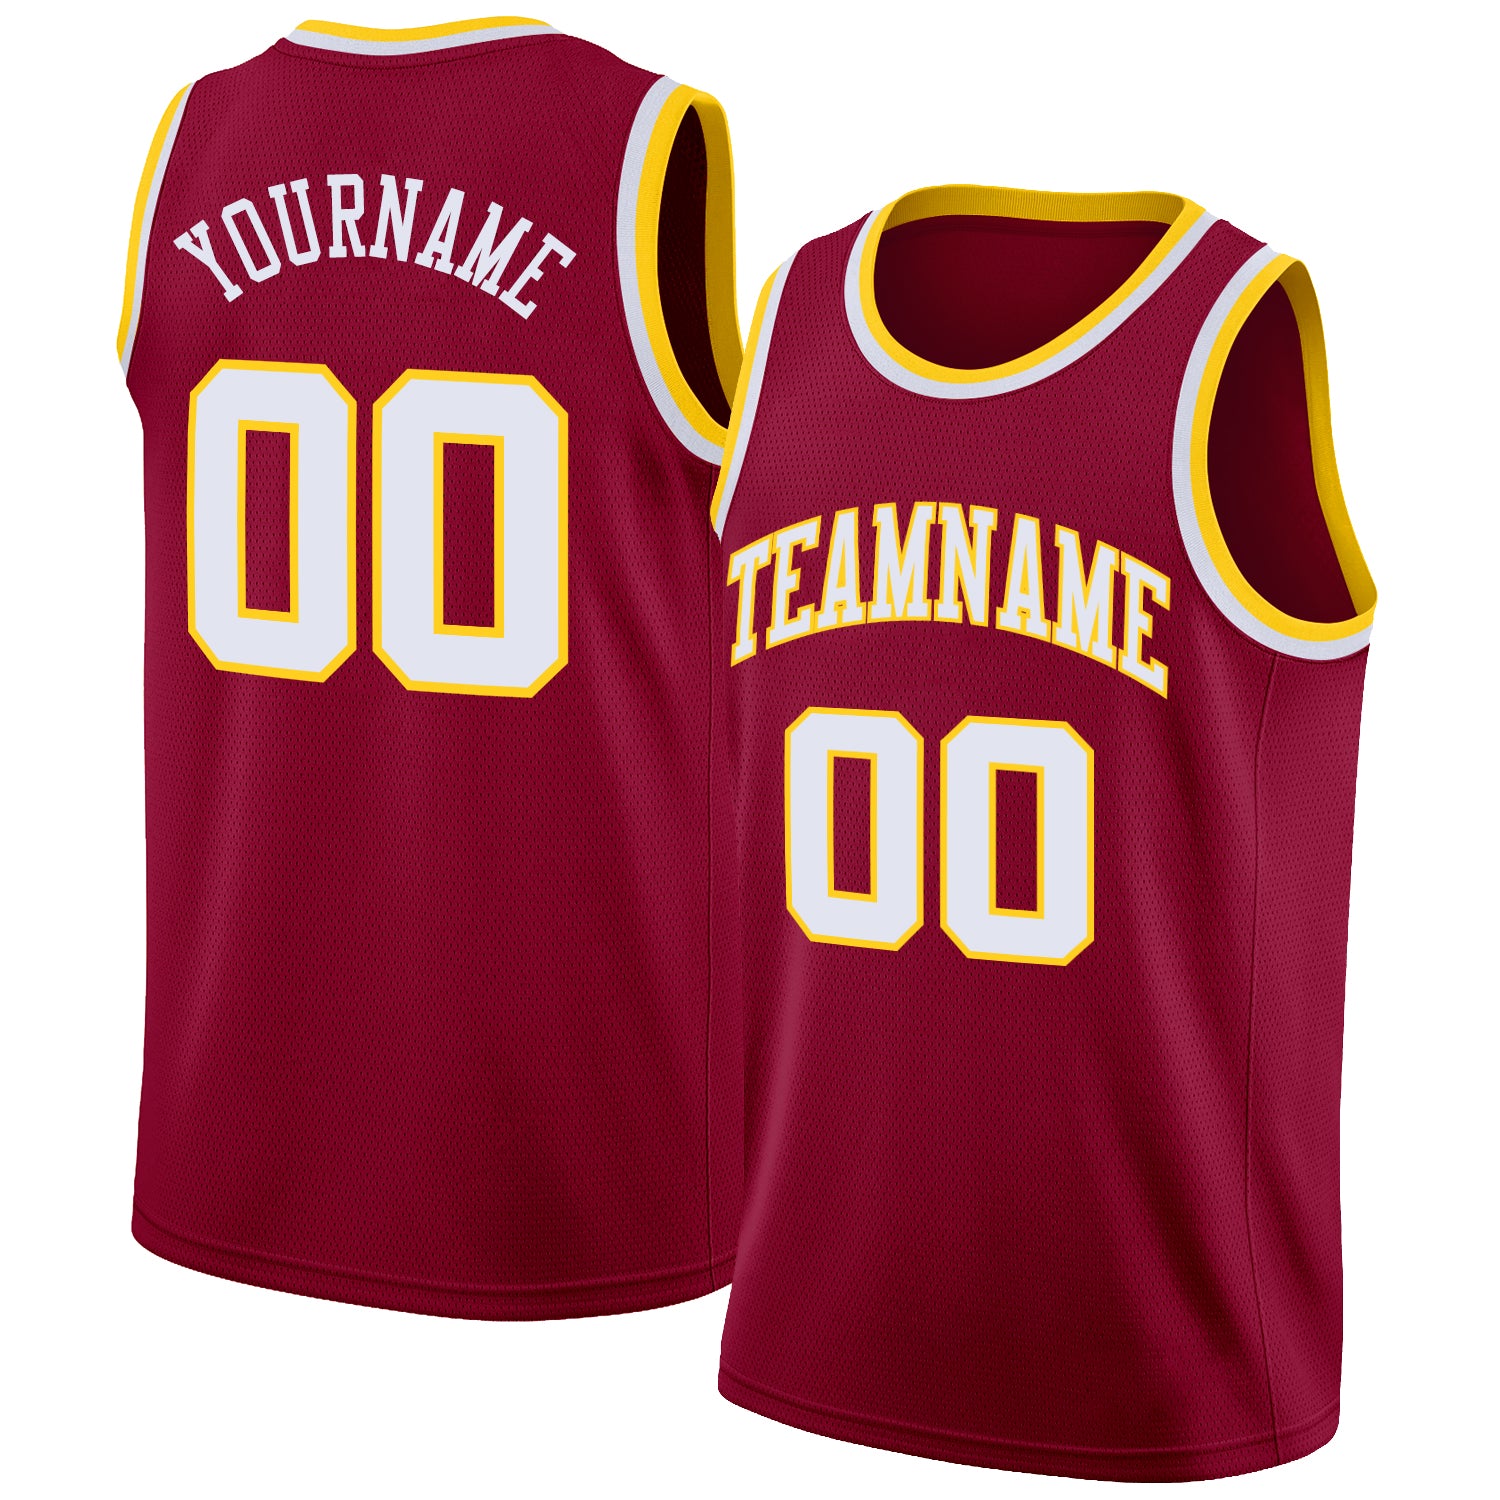 Make Your Own Custom Maroon White Gold Rib-Knit Basketball Jersey Sale ...